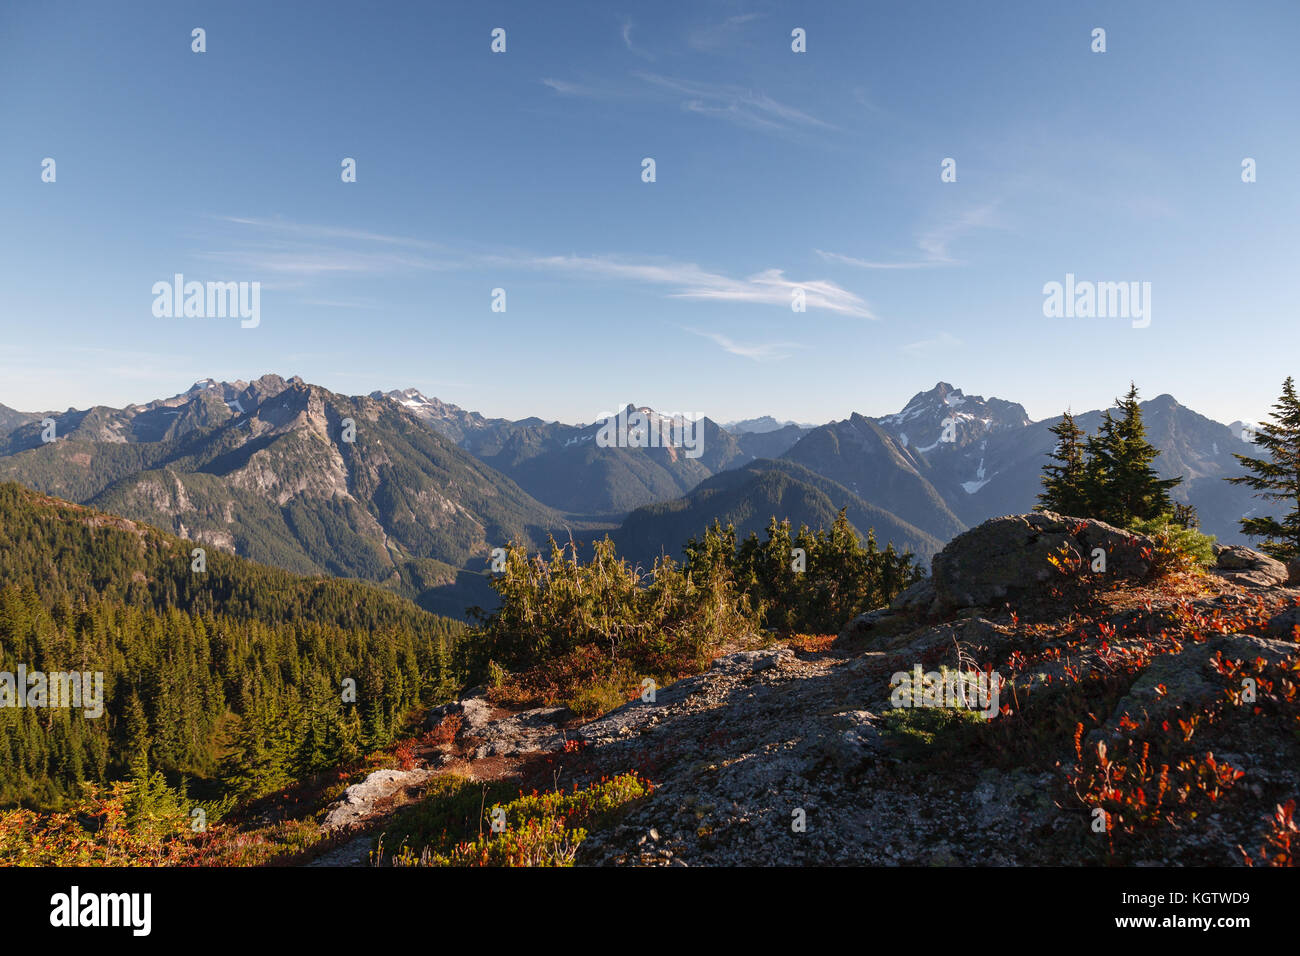 A wide view of the Cascade Mountain Range from a viewpoint along the Mount Dickerman hiking trail. Stock Photo